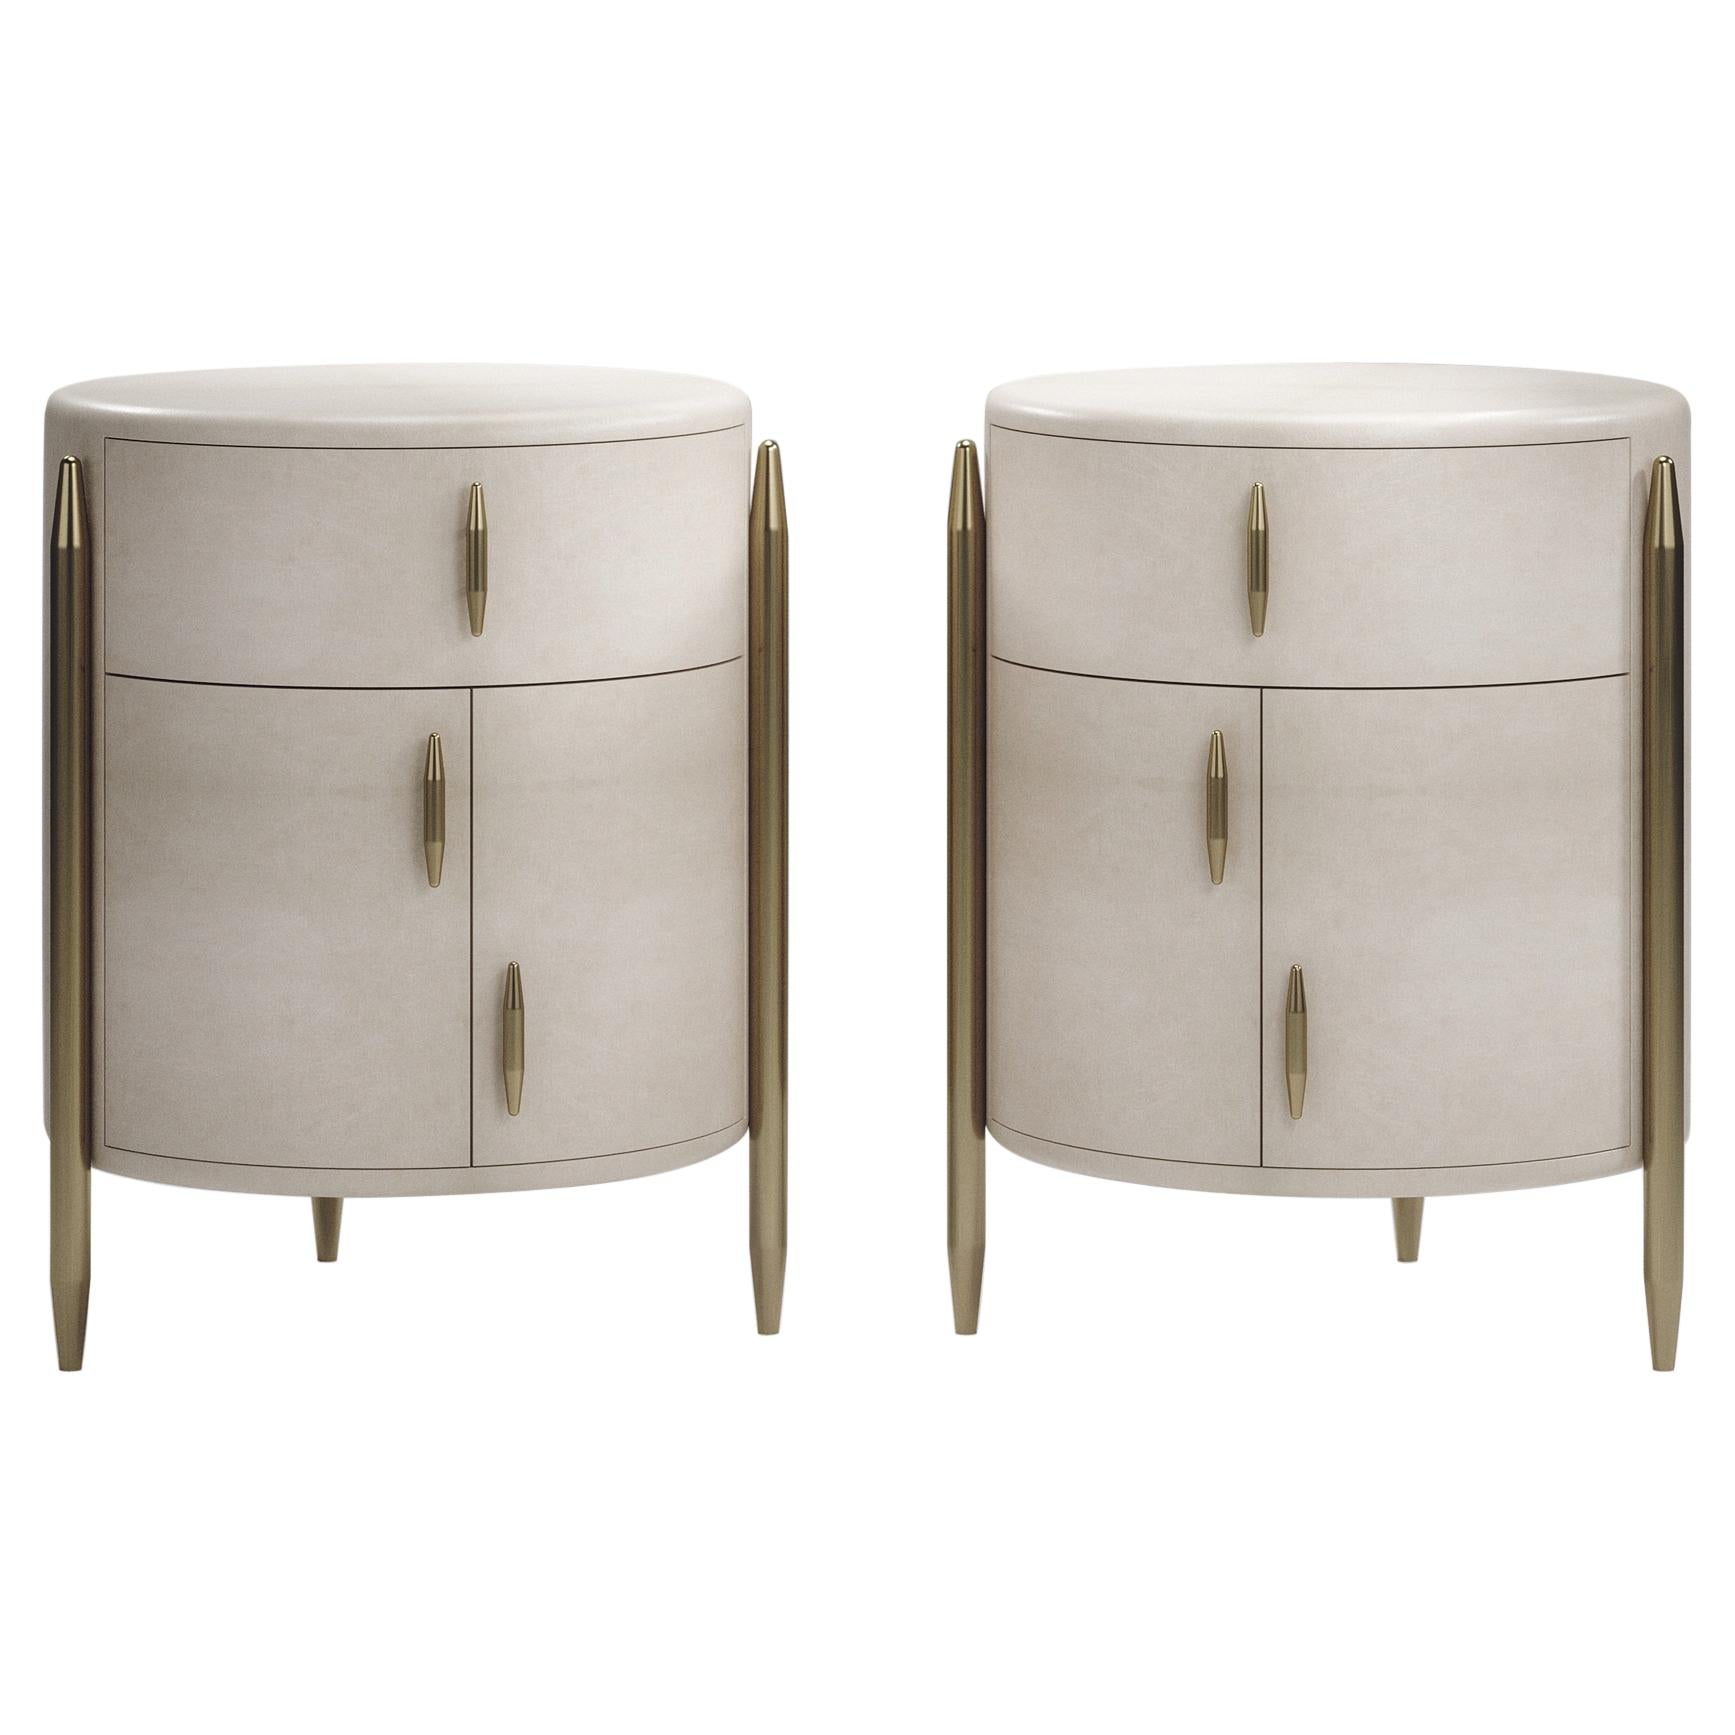 Pair of Parchment Night Stands with Brass Accents by Kifu Paris For Sale